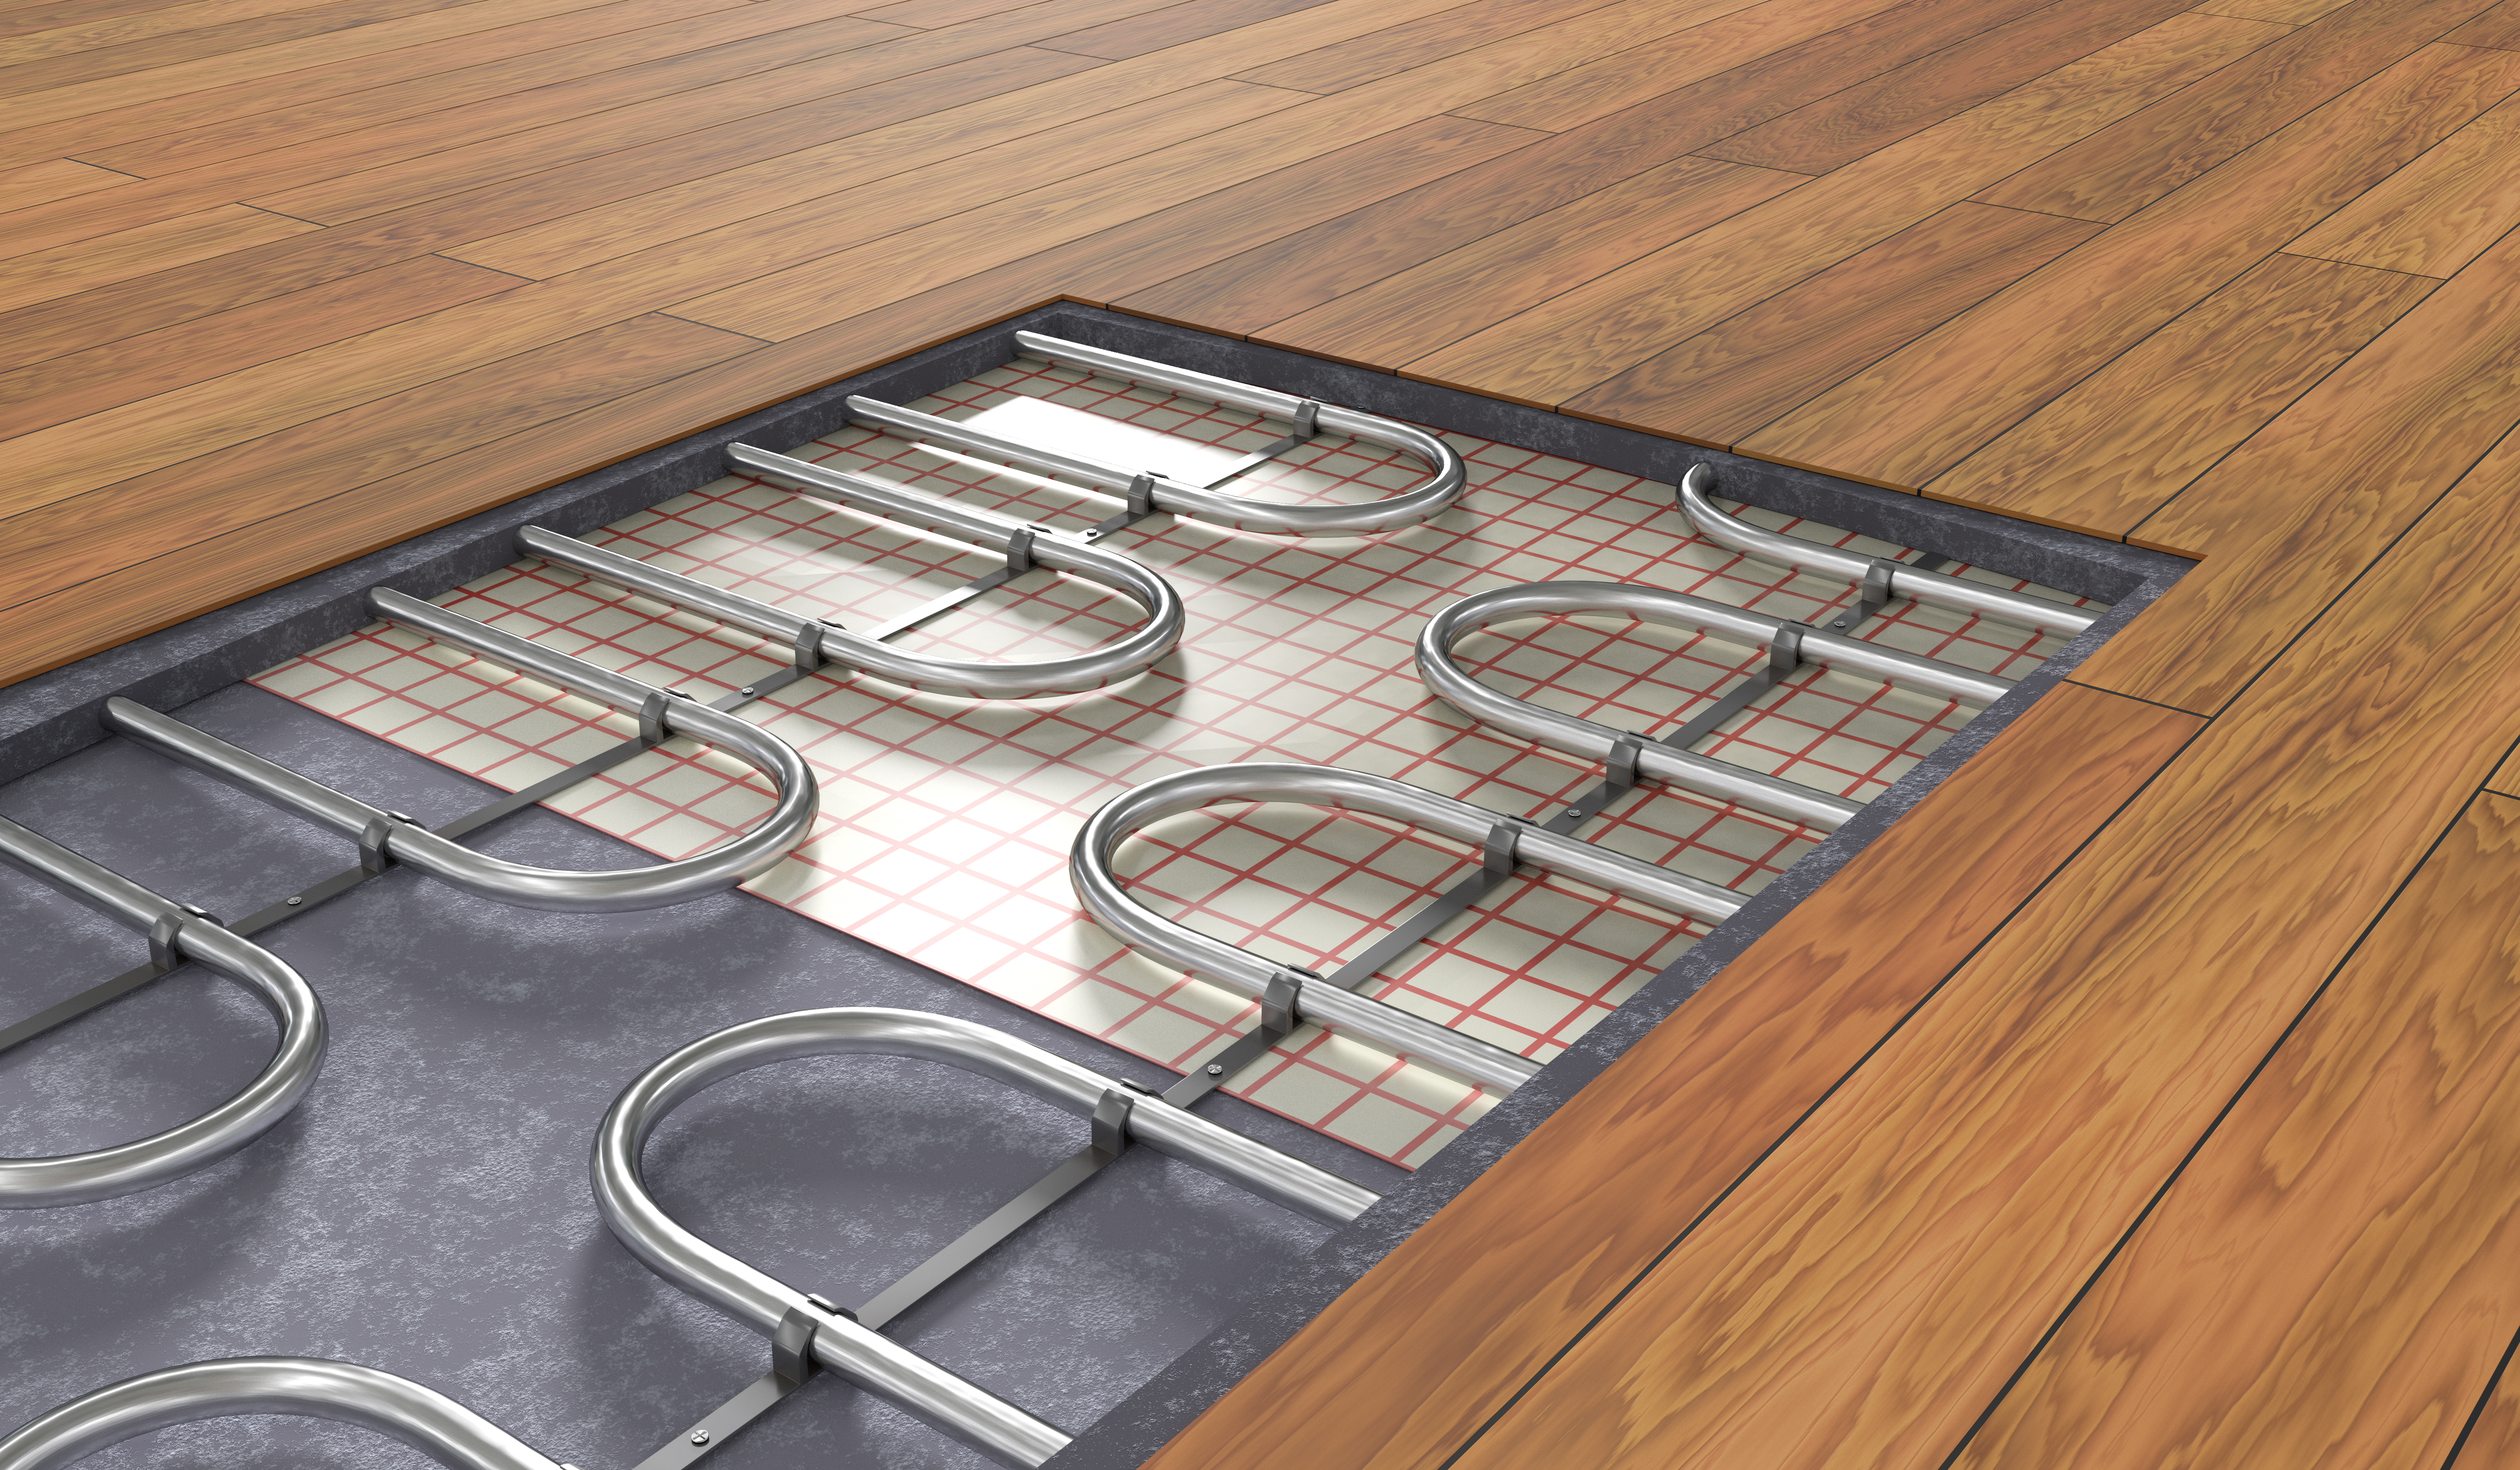 Heating Wood Floor Featured Image of a 3D render of wood over radiant heat